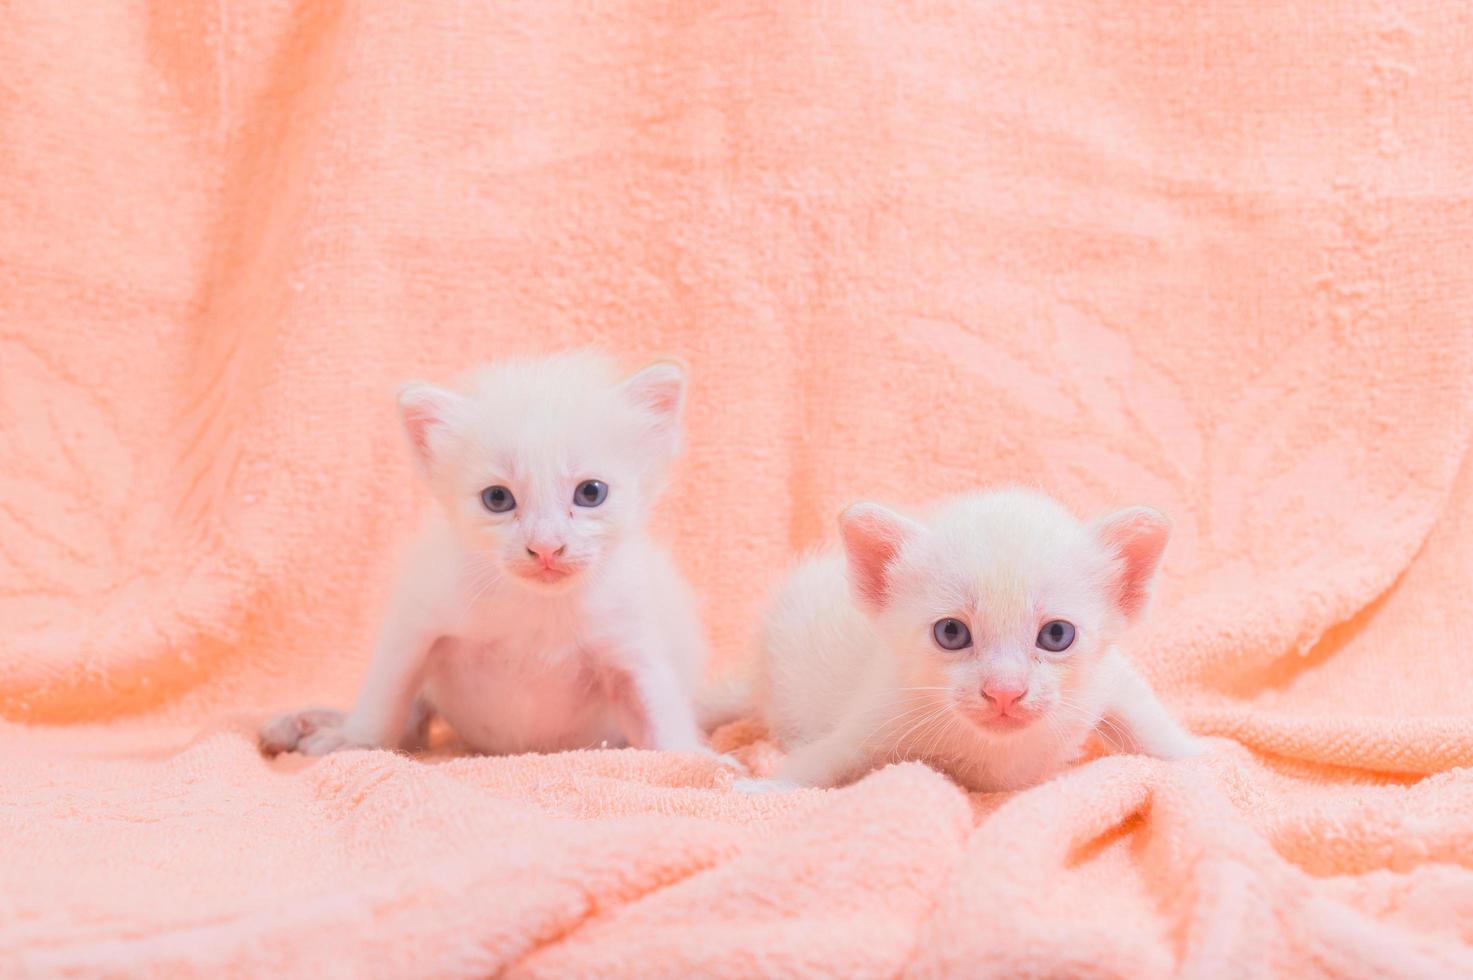 Cute white kittens on a towel photo